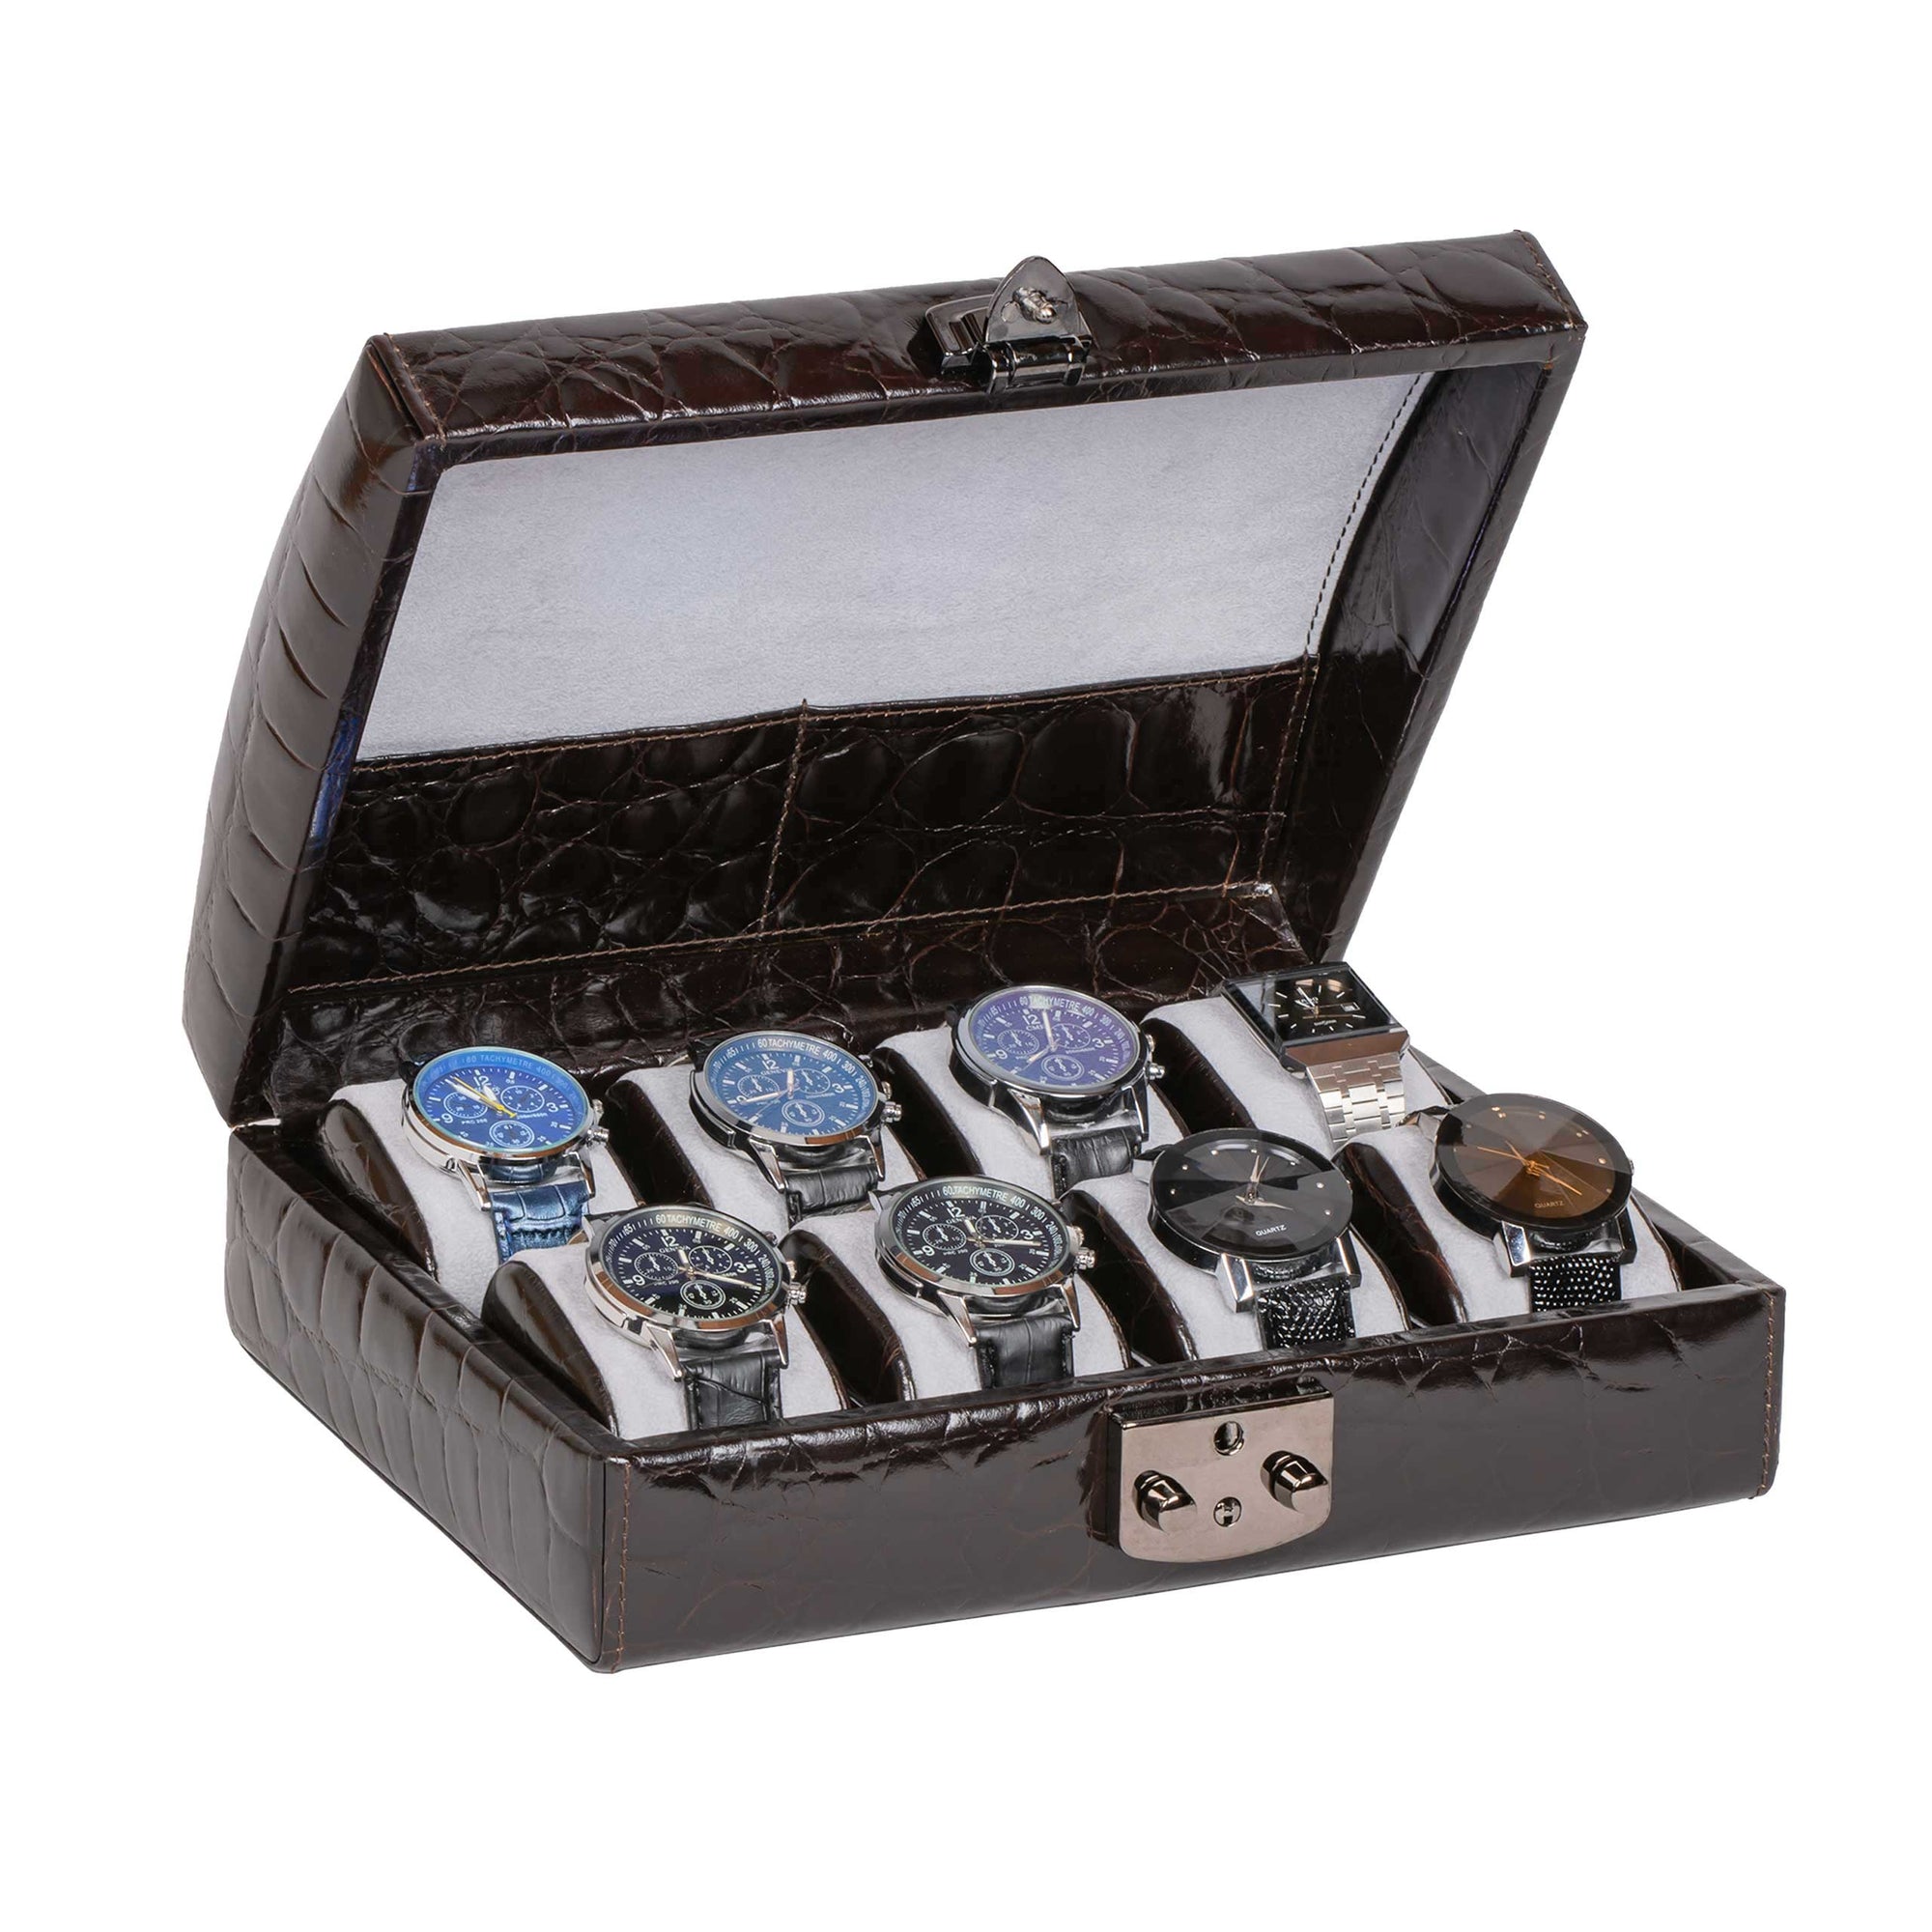 DiLoro Italian Leather Travel Watch Case Holds Eight Watches Brown Croc Print - Open, inside view with watches (not included)